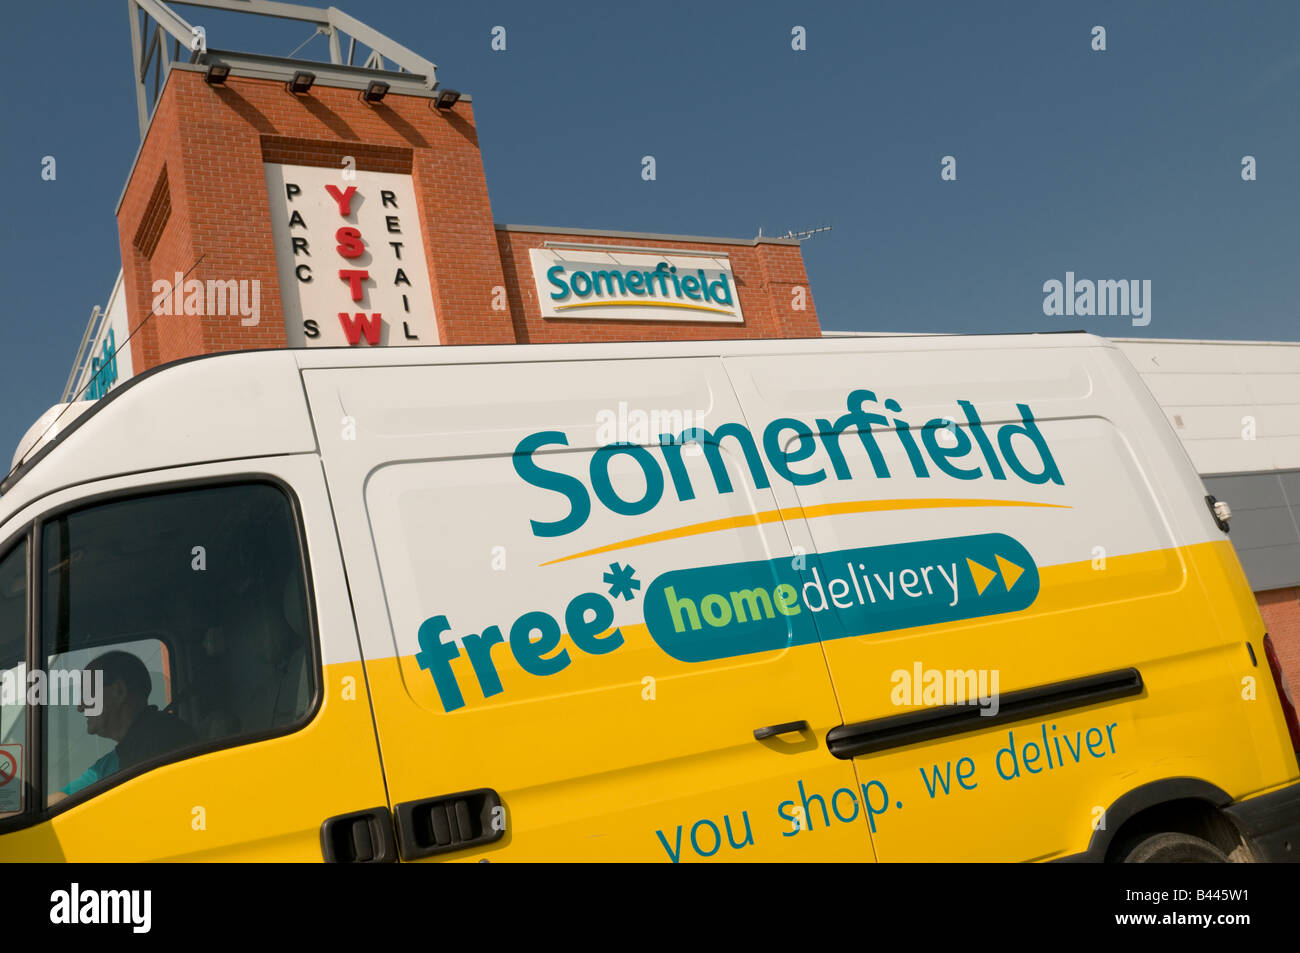 Somerfield supermarket free home delivery service, Aberystwyth wales UK Stock Photo